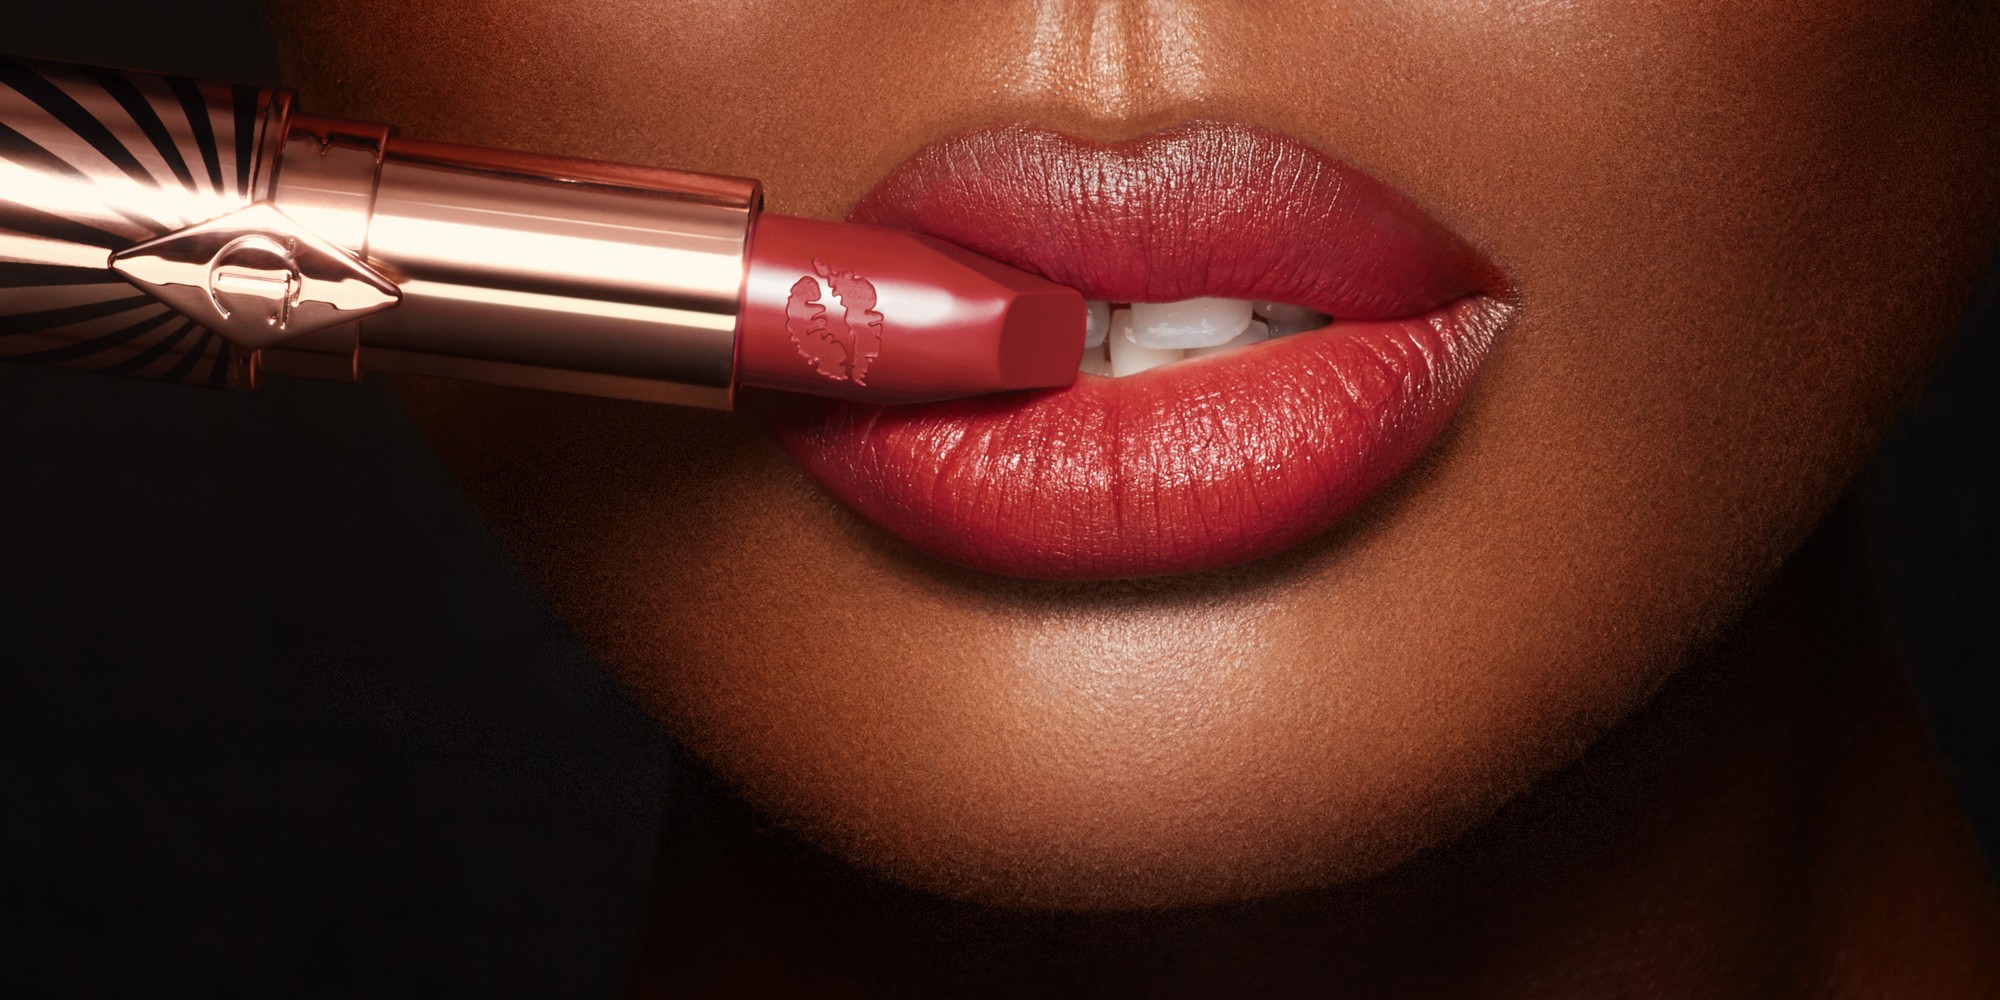 CHARLOTTE TILBURY HOT LIPS 2 COLLECTION